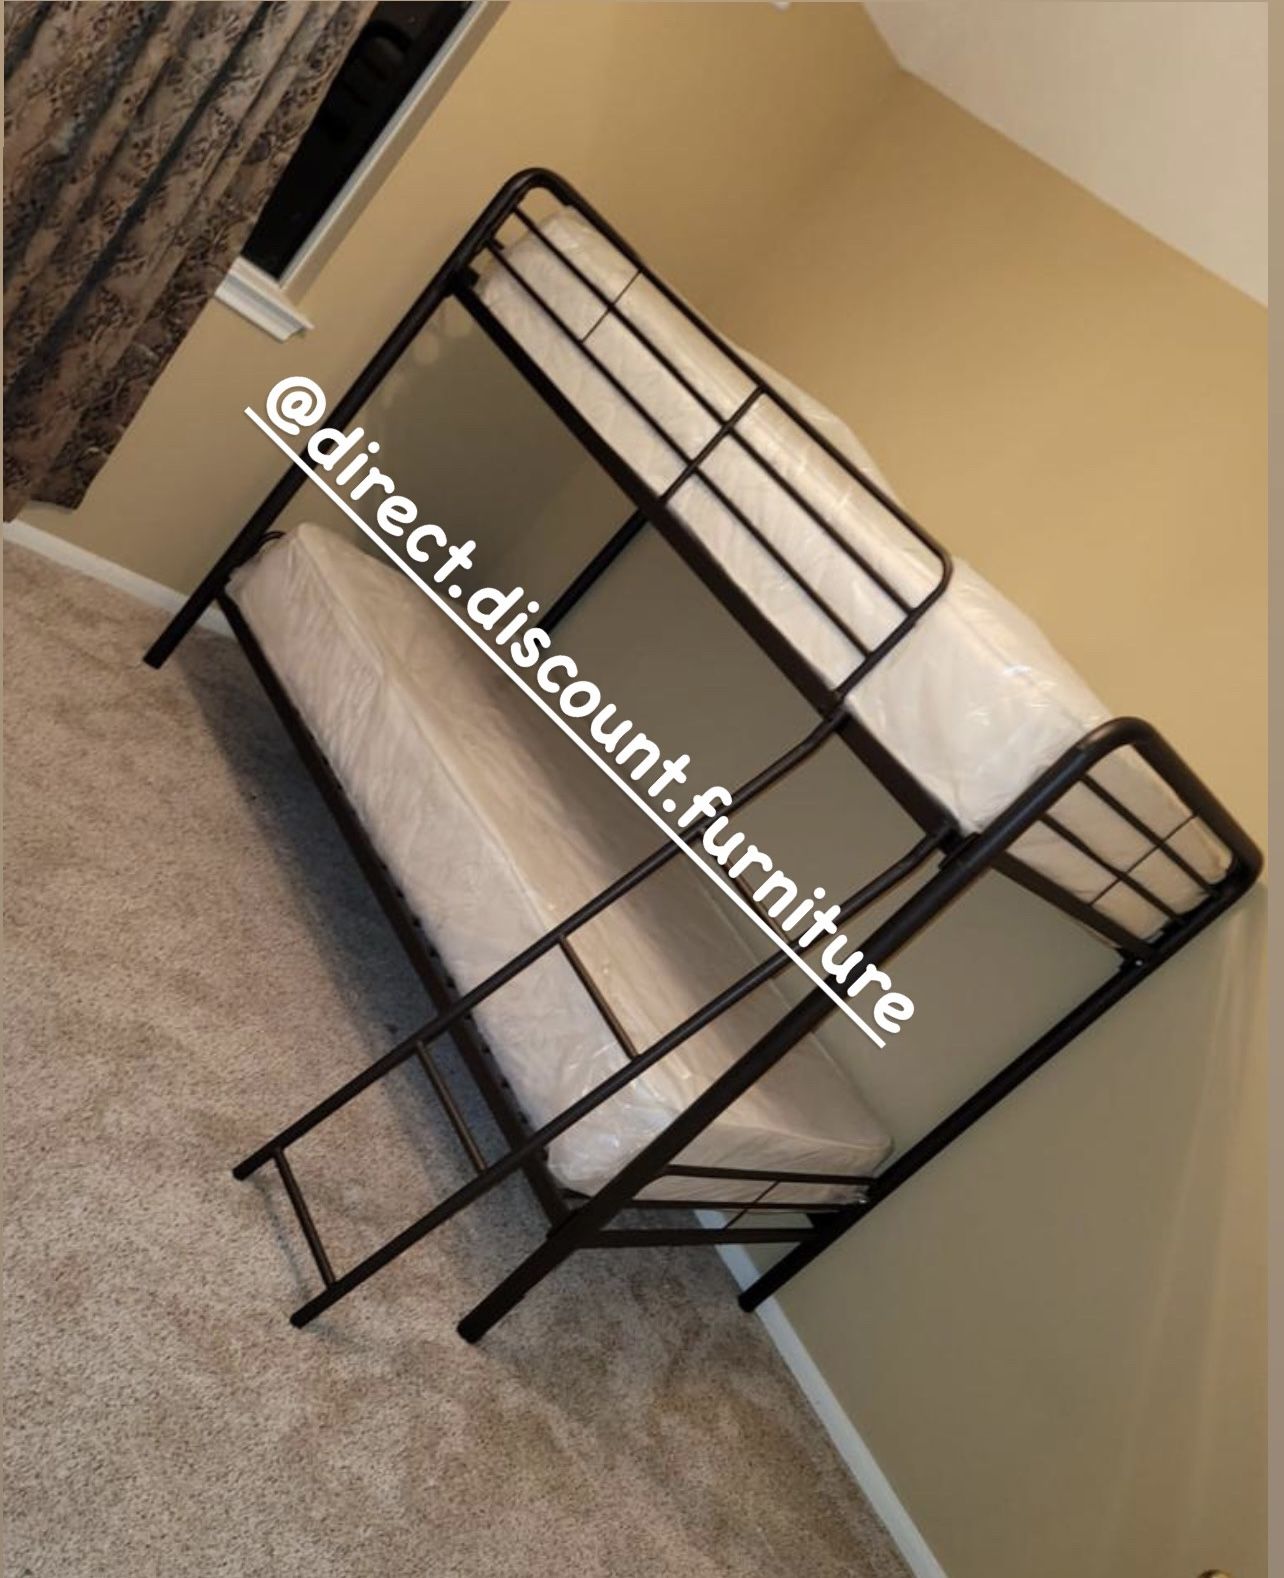 Bunk Bed (new) With Mattres 